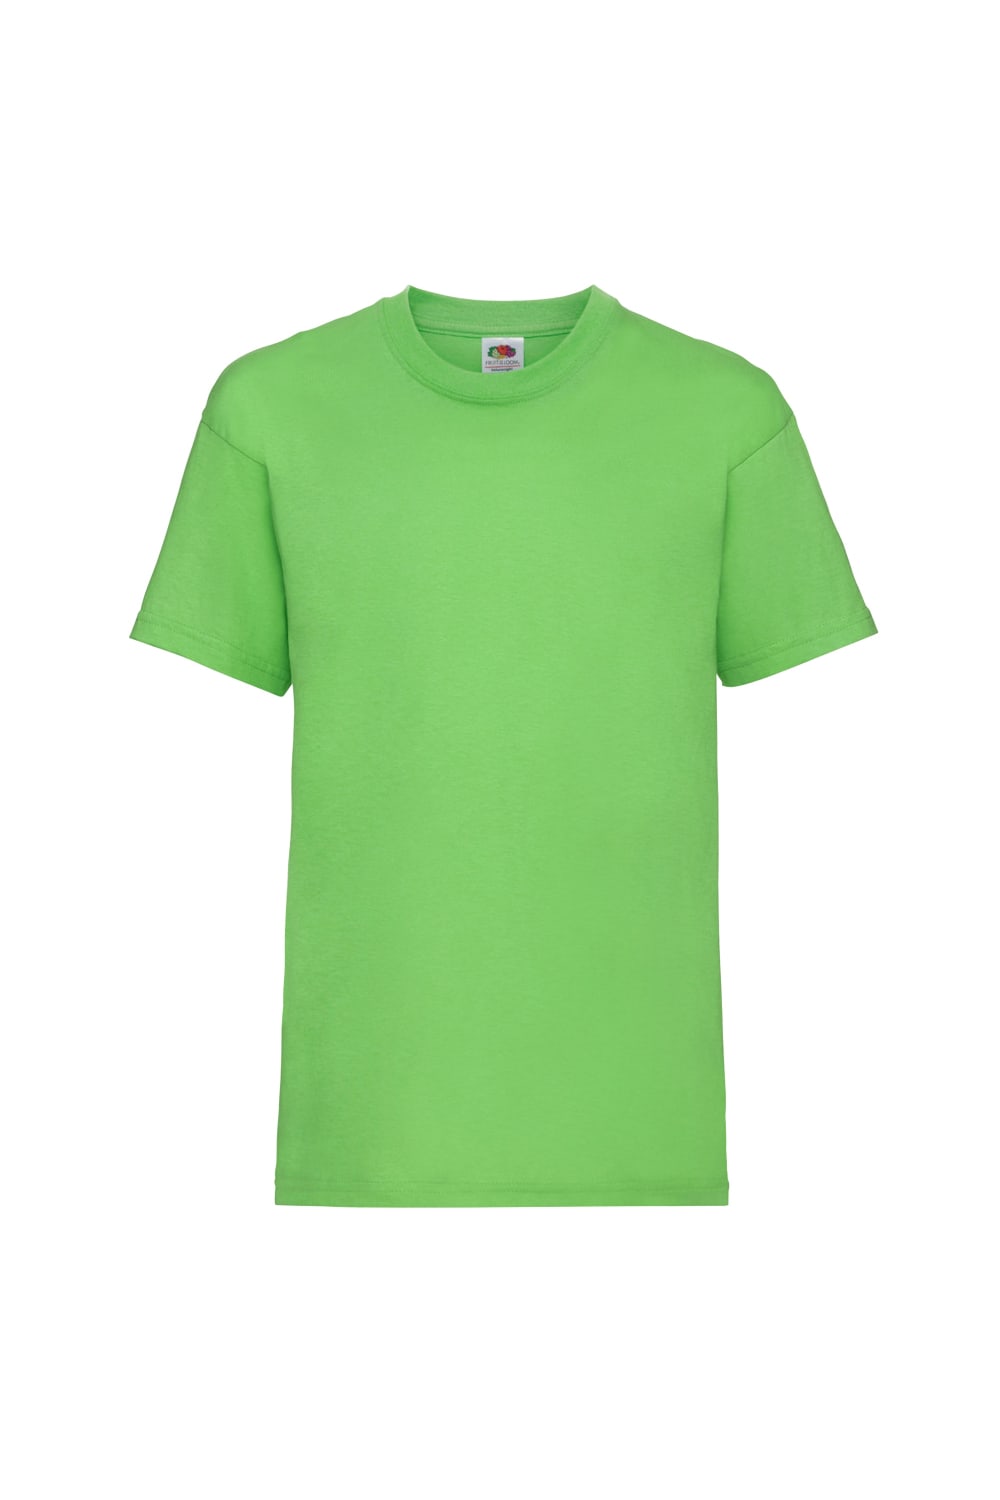 Fruit Of The Loom Childrens/Kids Little Boys Valueweight Short Sleeve T-Shirt (Pack of 2) (Lime)